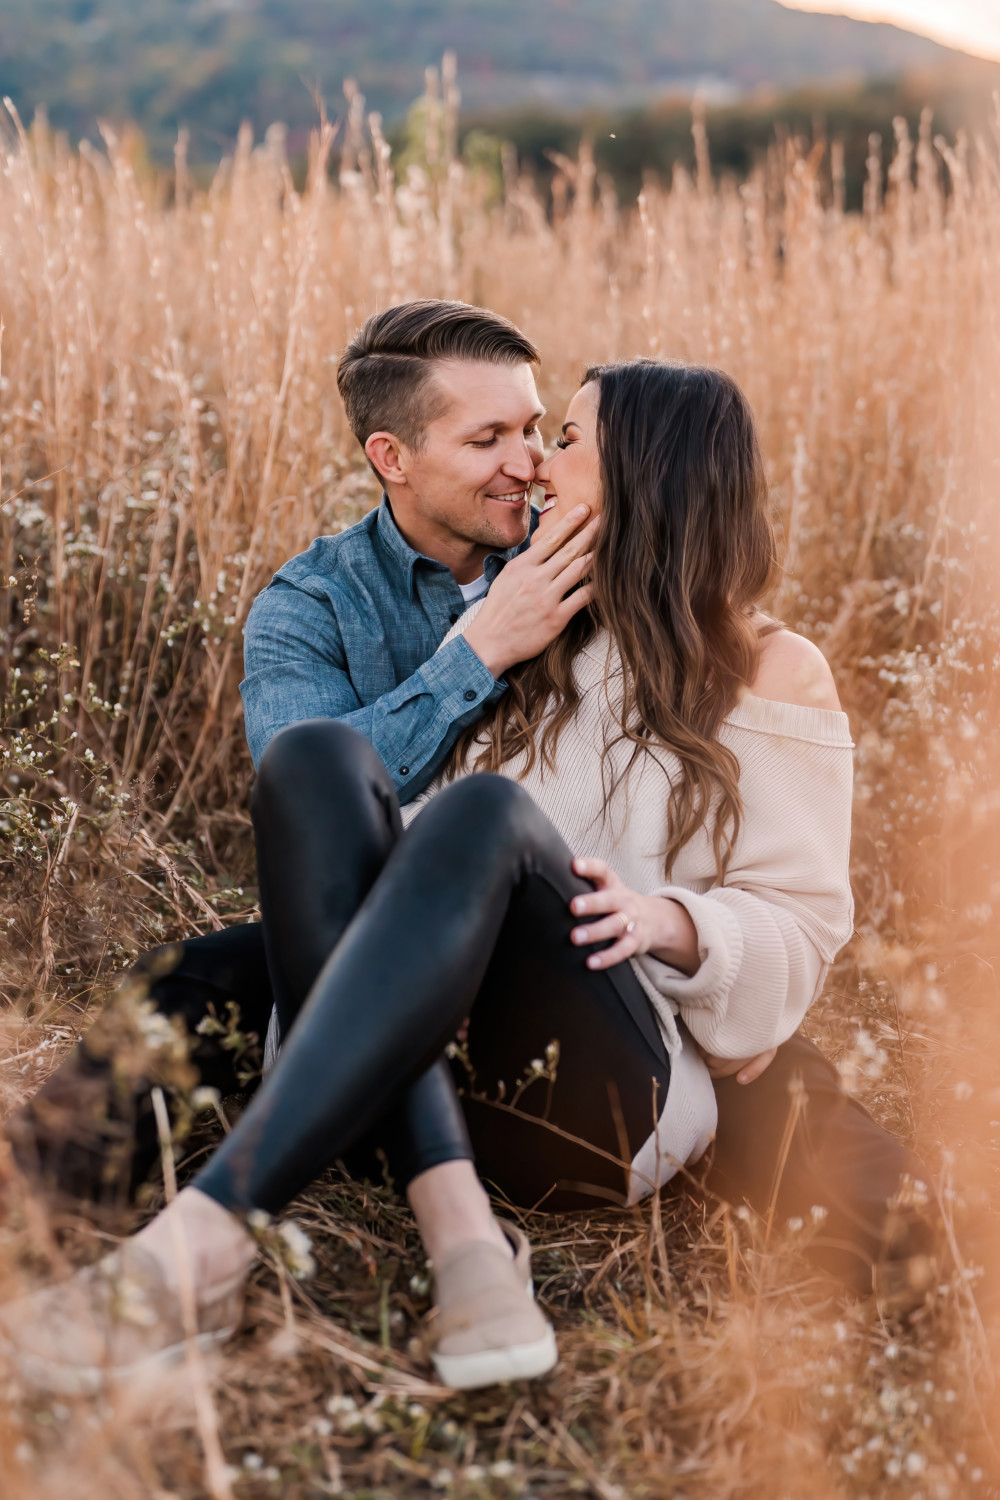 Fall Engagement Photos Couple Smiling